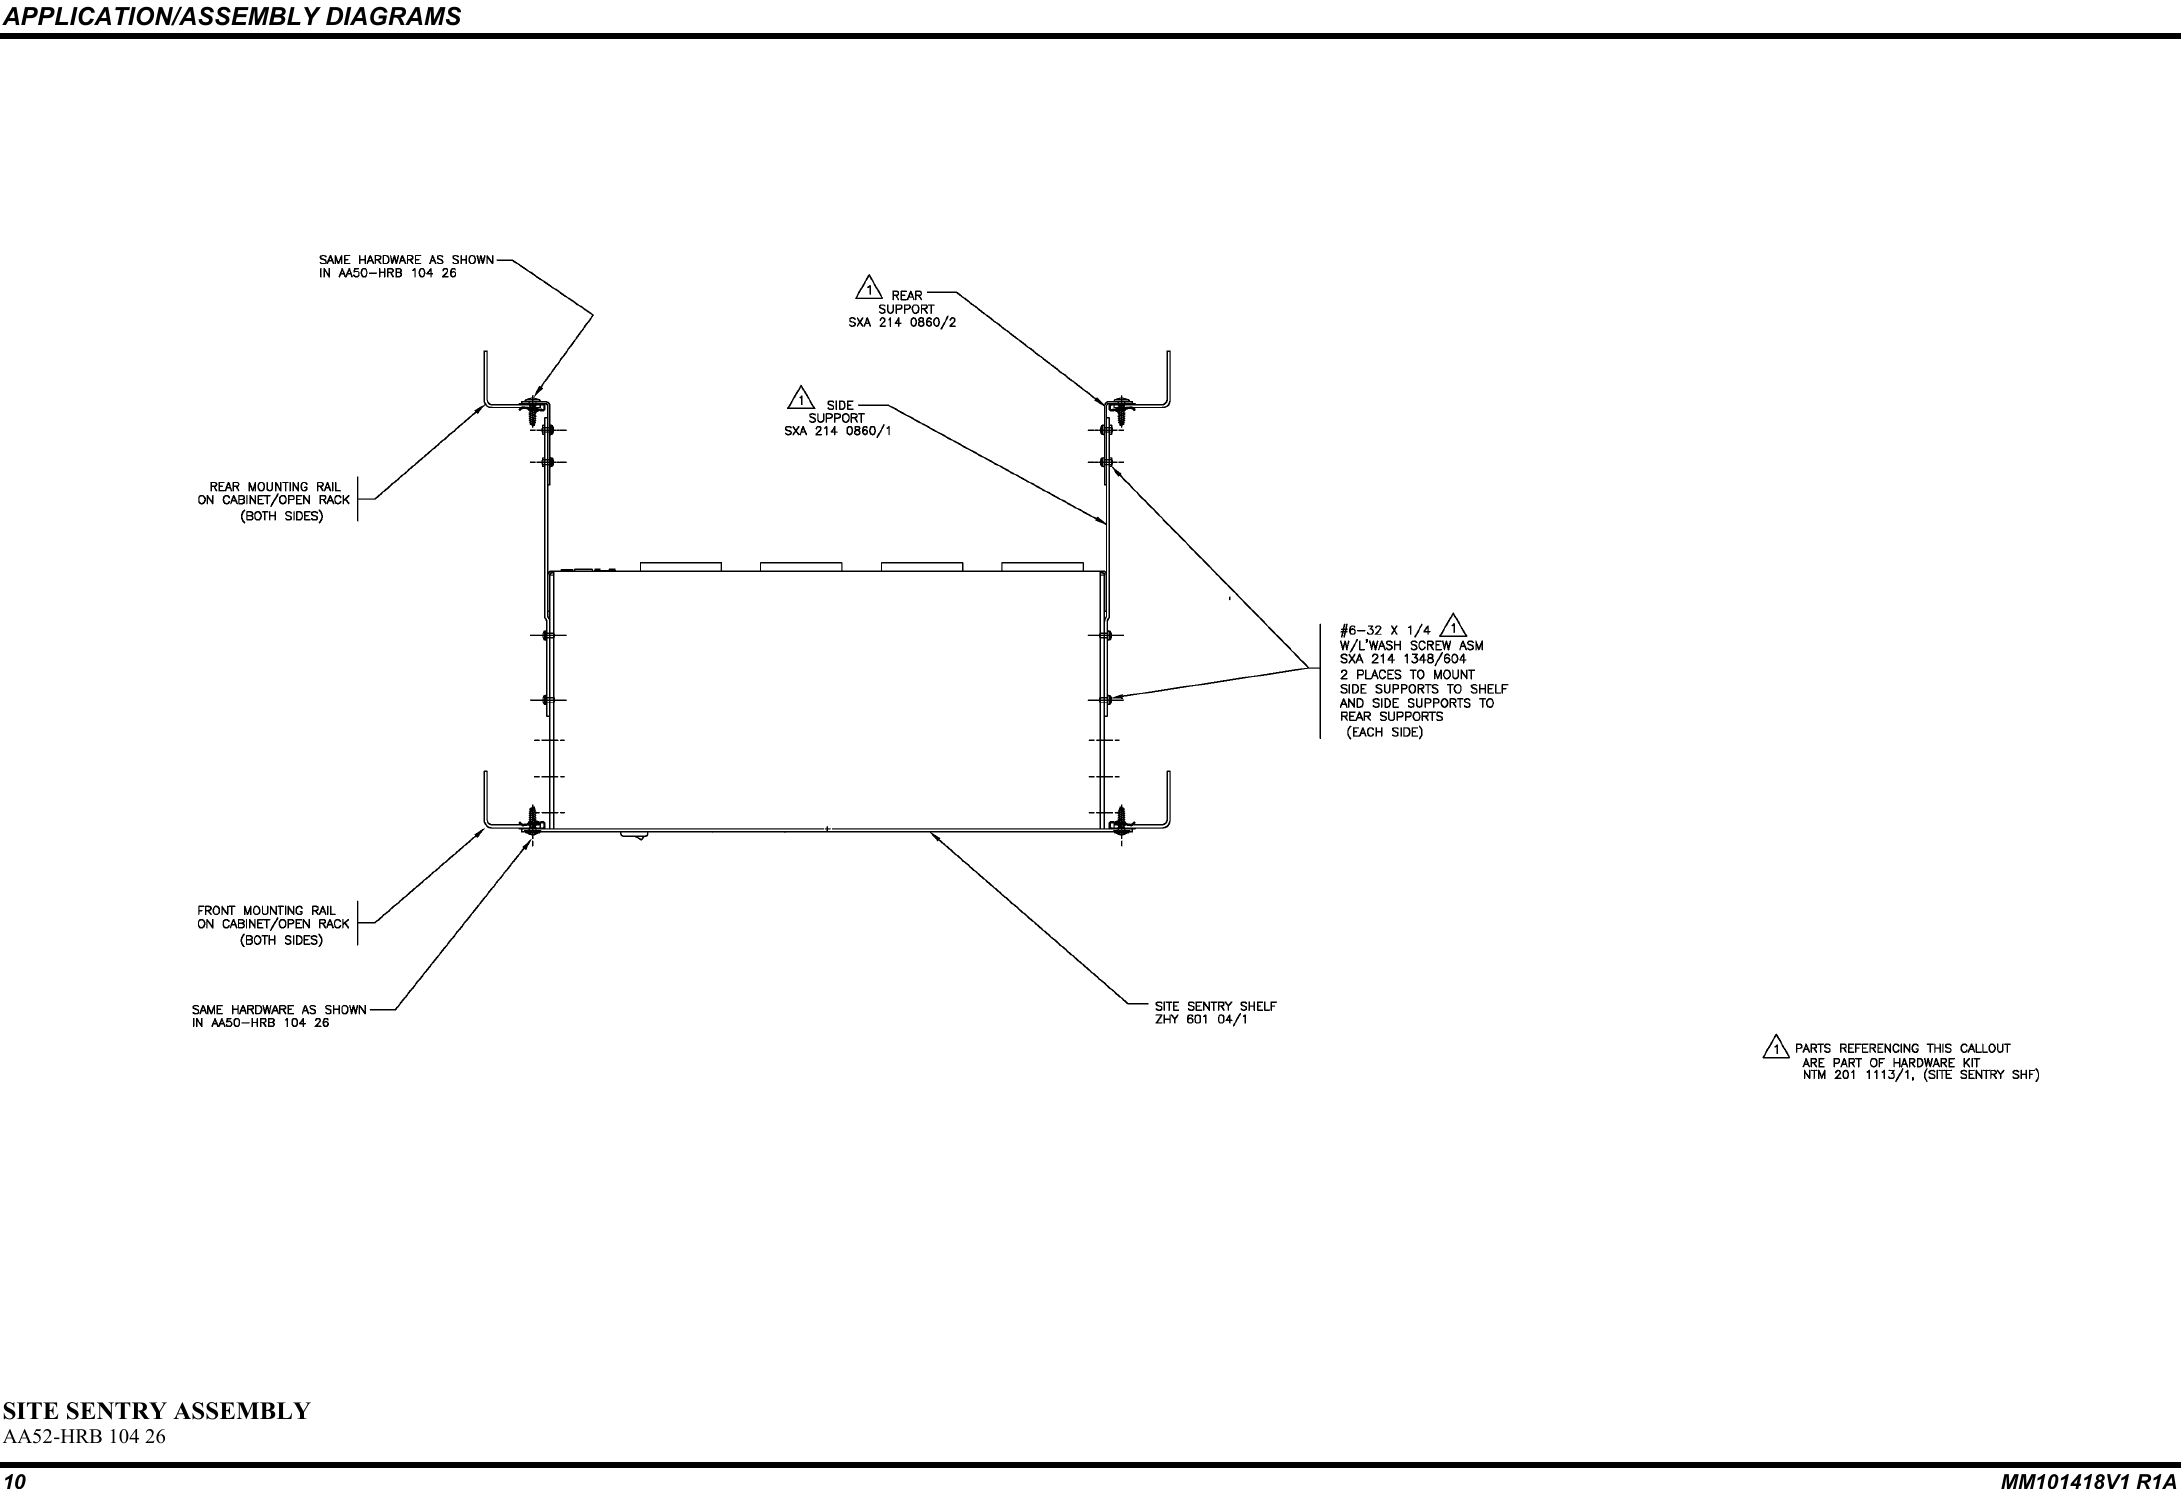 APPLICATION/ASSEMBLY DIAGRAMS10 MM101418V1 R1ASITE SENTRY ASSEMBLYAA52-HRB 104 26